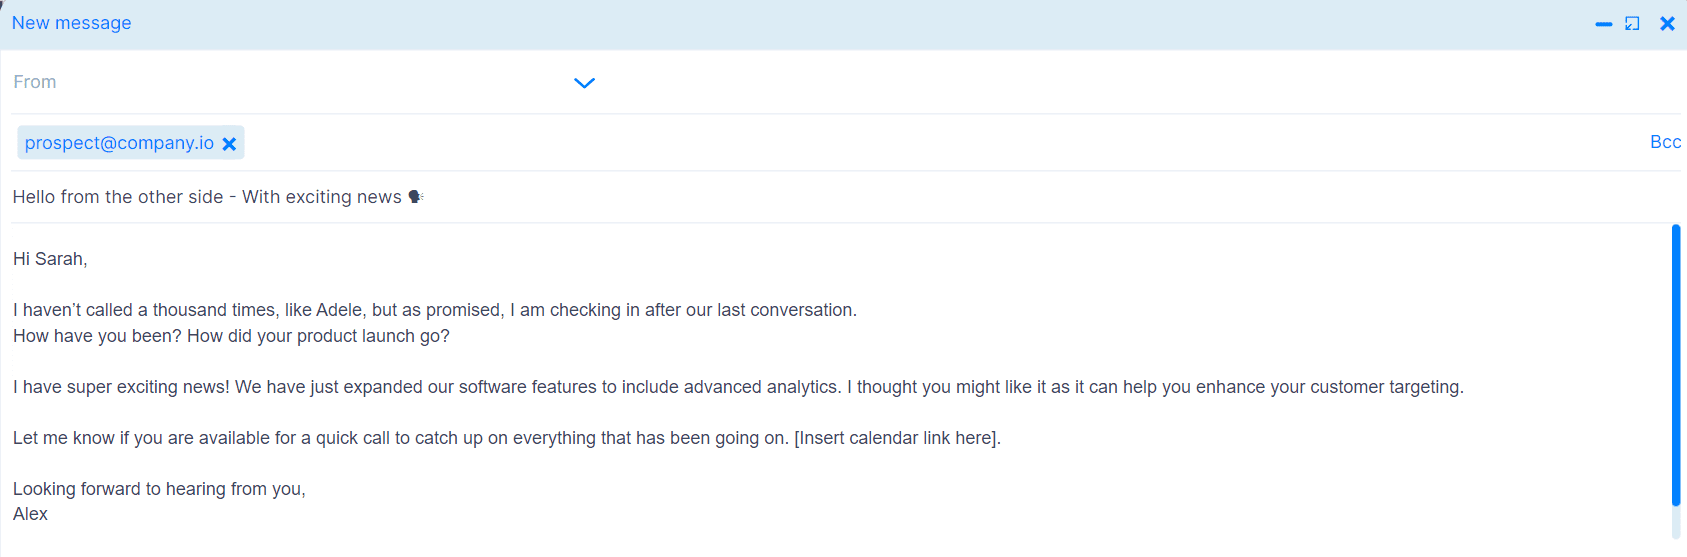 Follow-up email after a couple of months